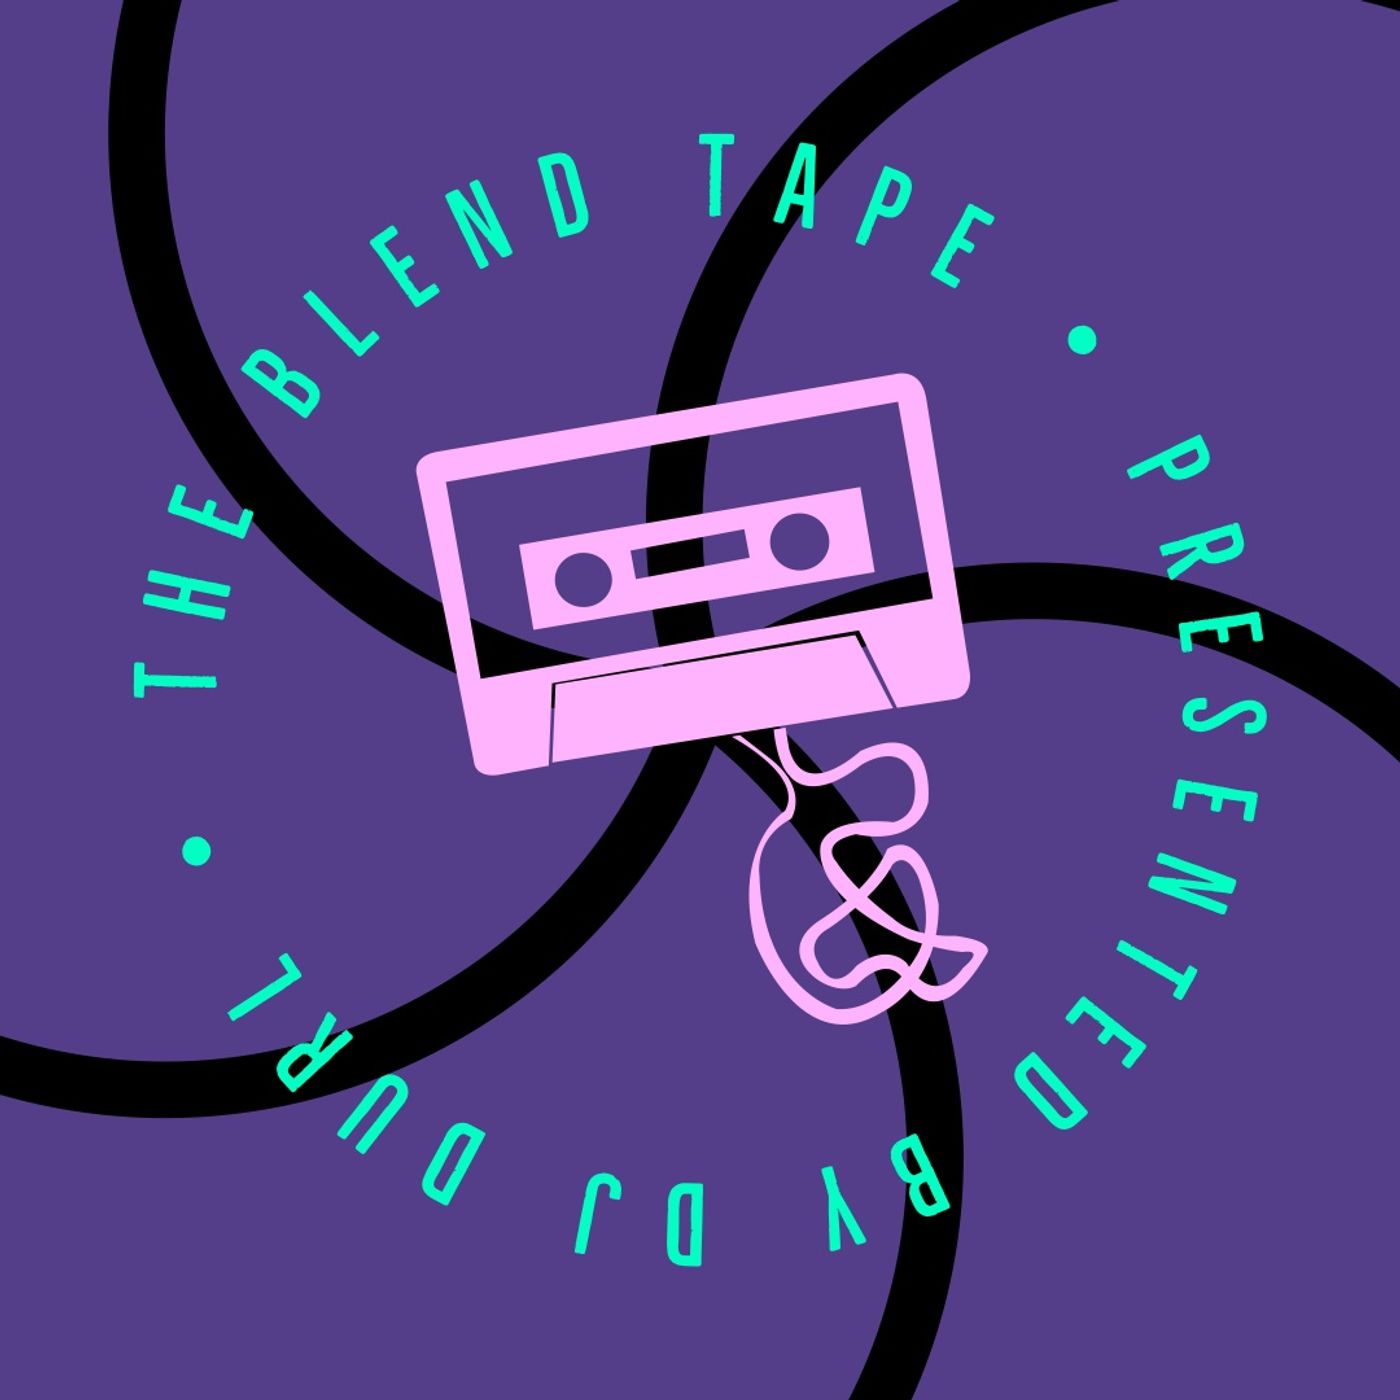 The Blend Tape